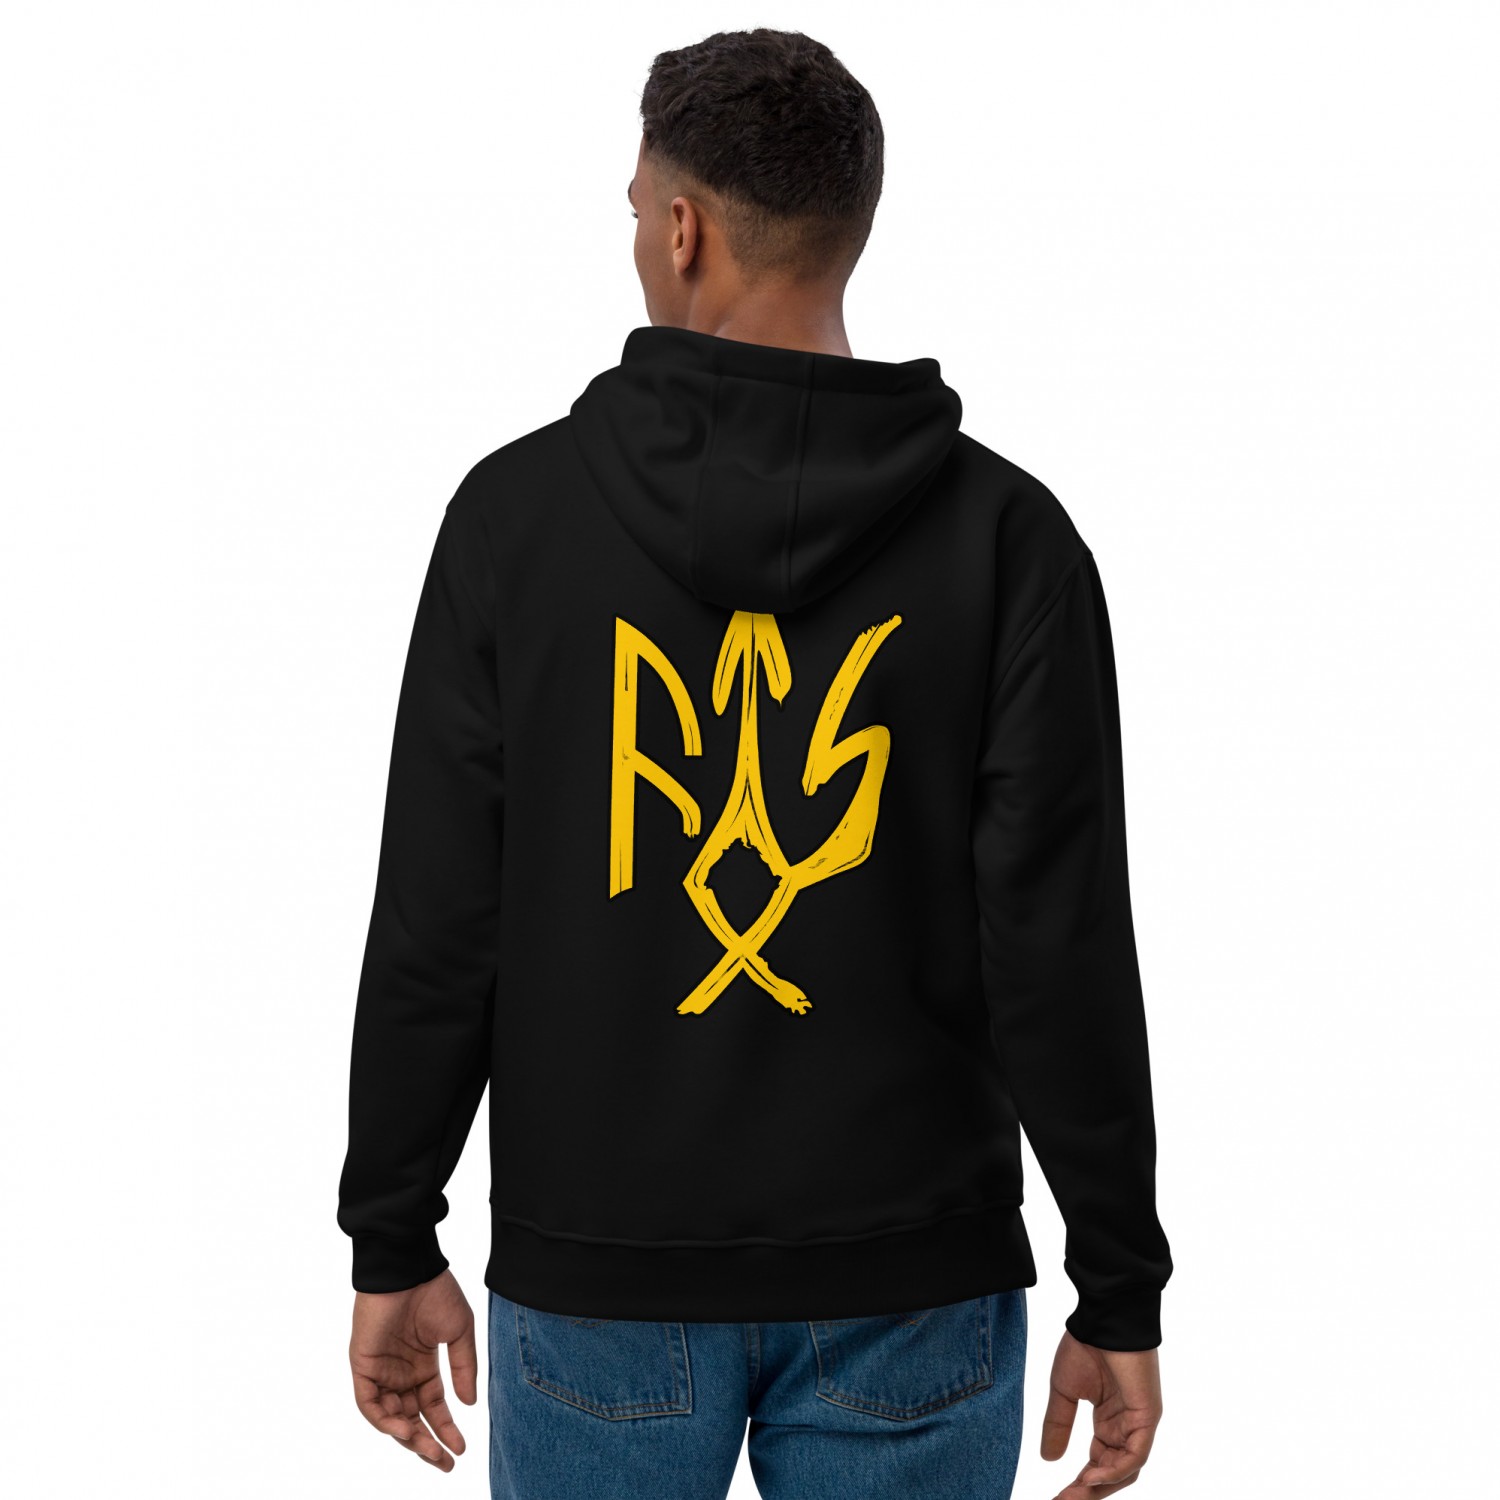 Hoody Trident in the form of runes